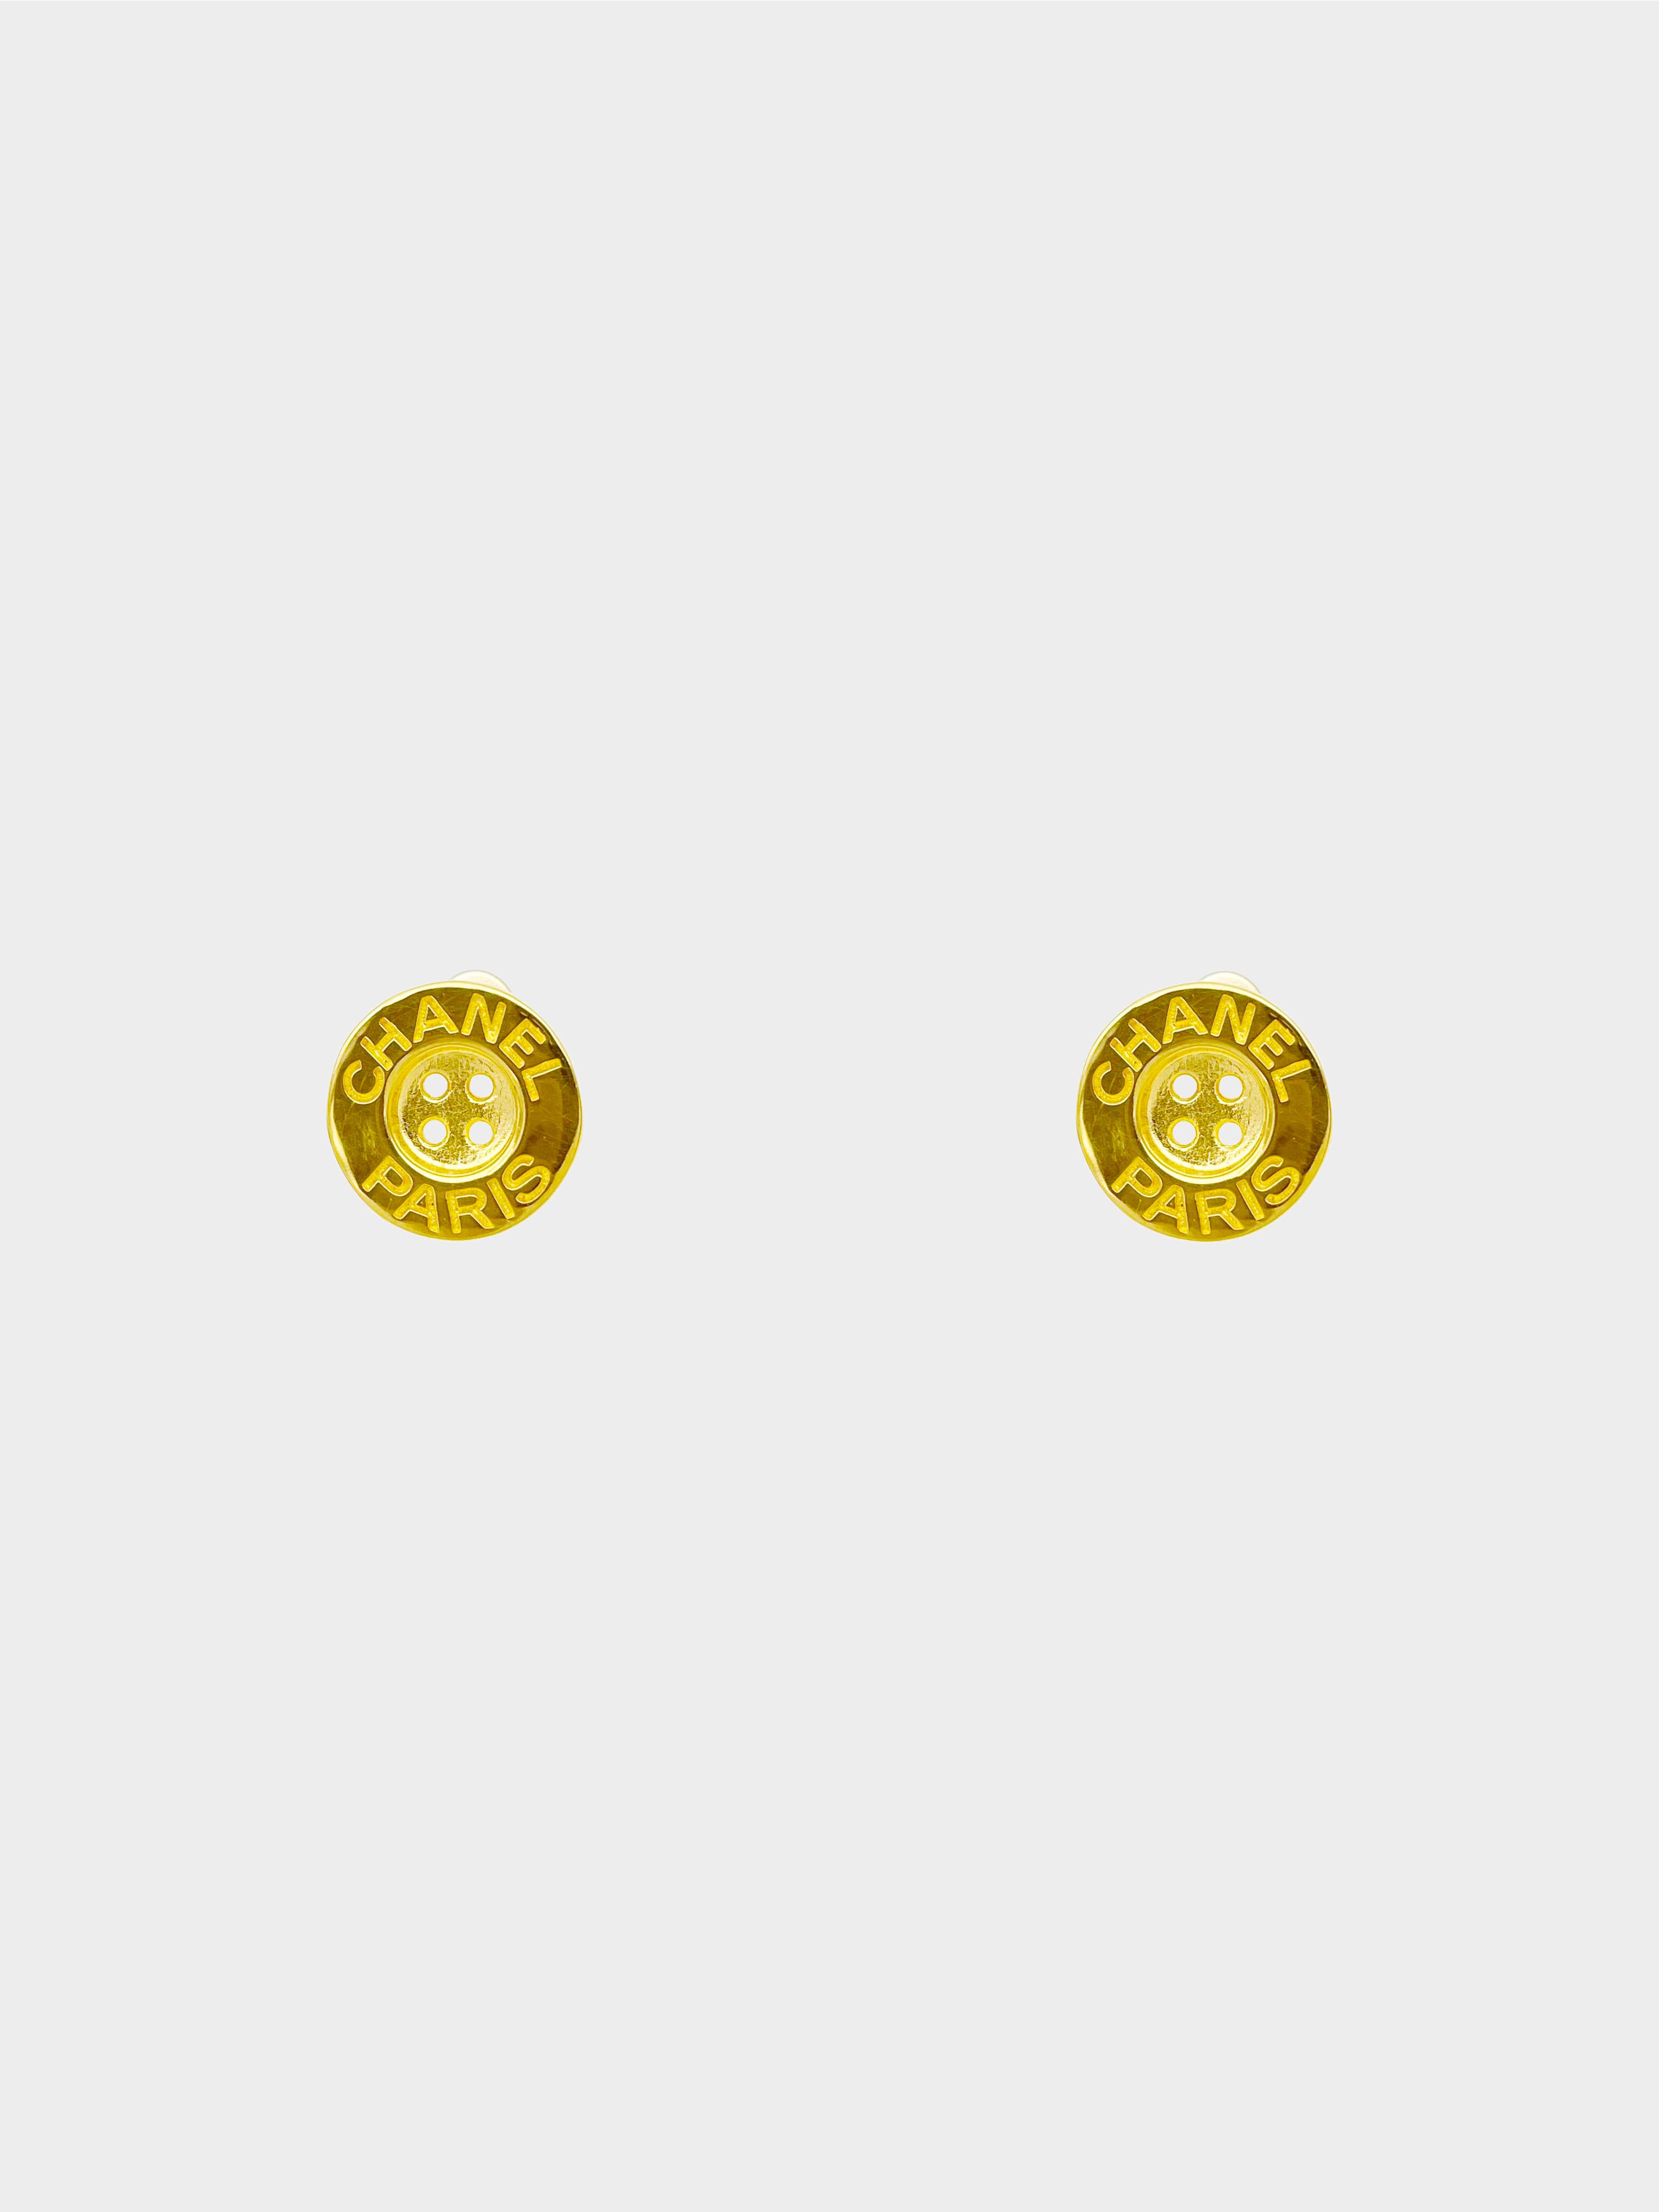 Chanel Fall 2020 Gold Chanel Paris Button Stud Earrings